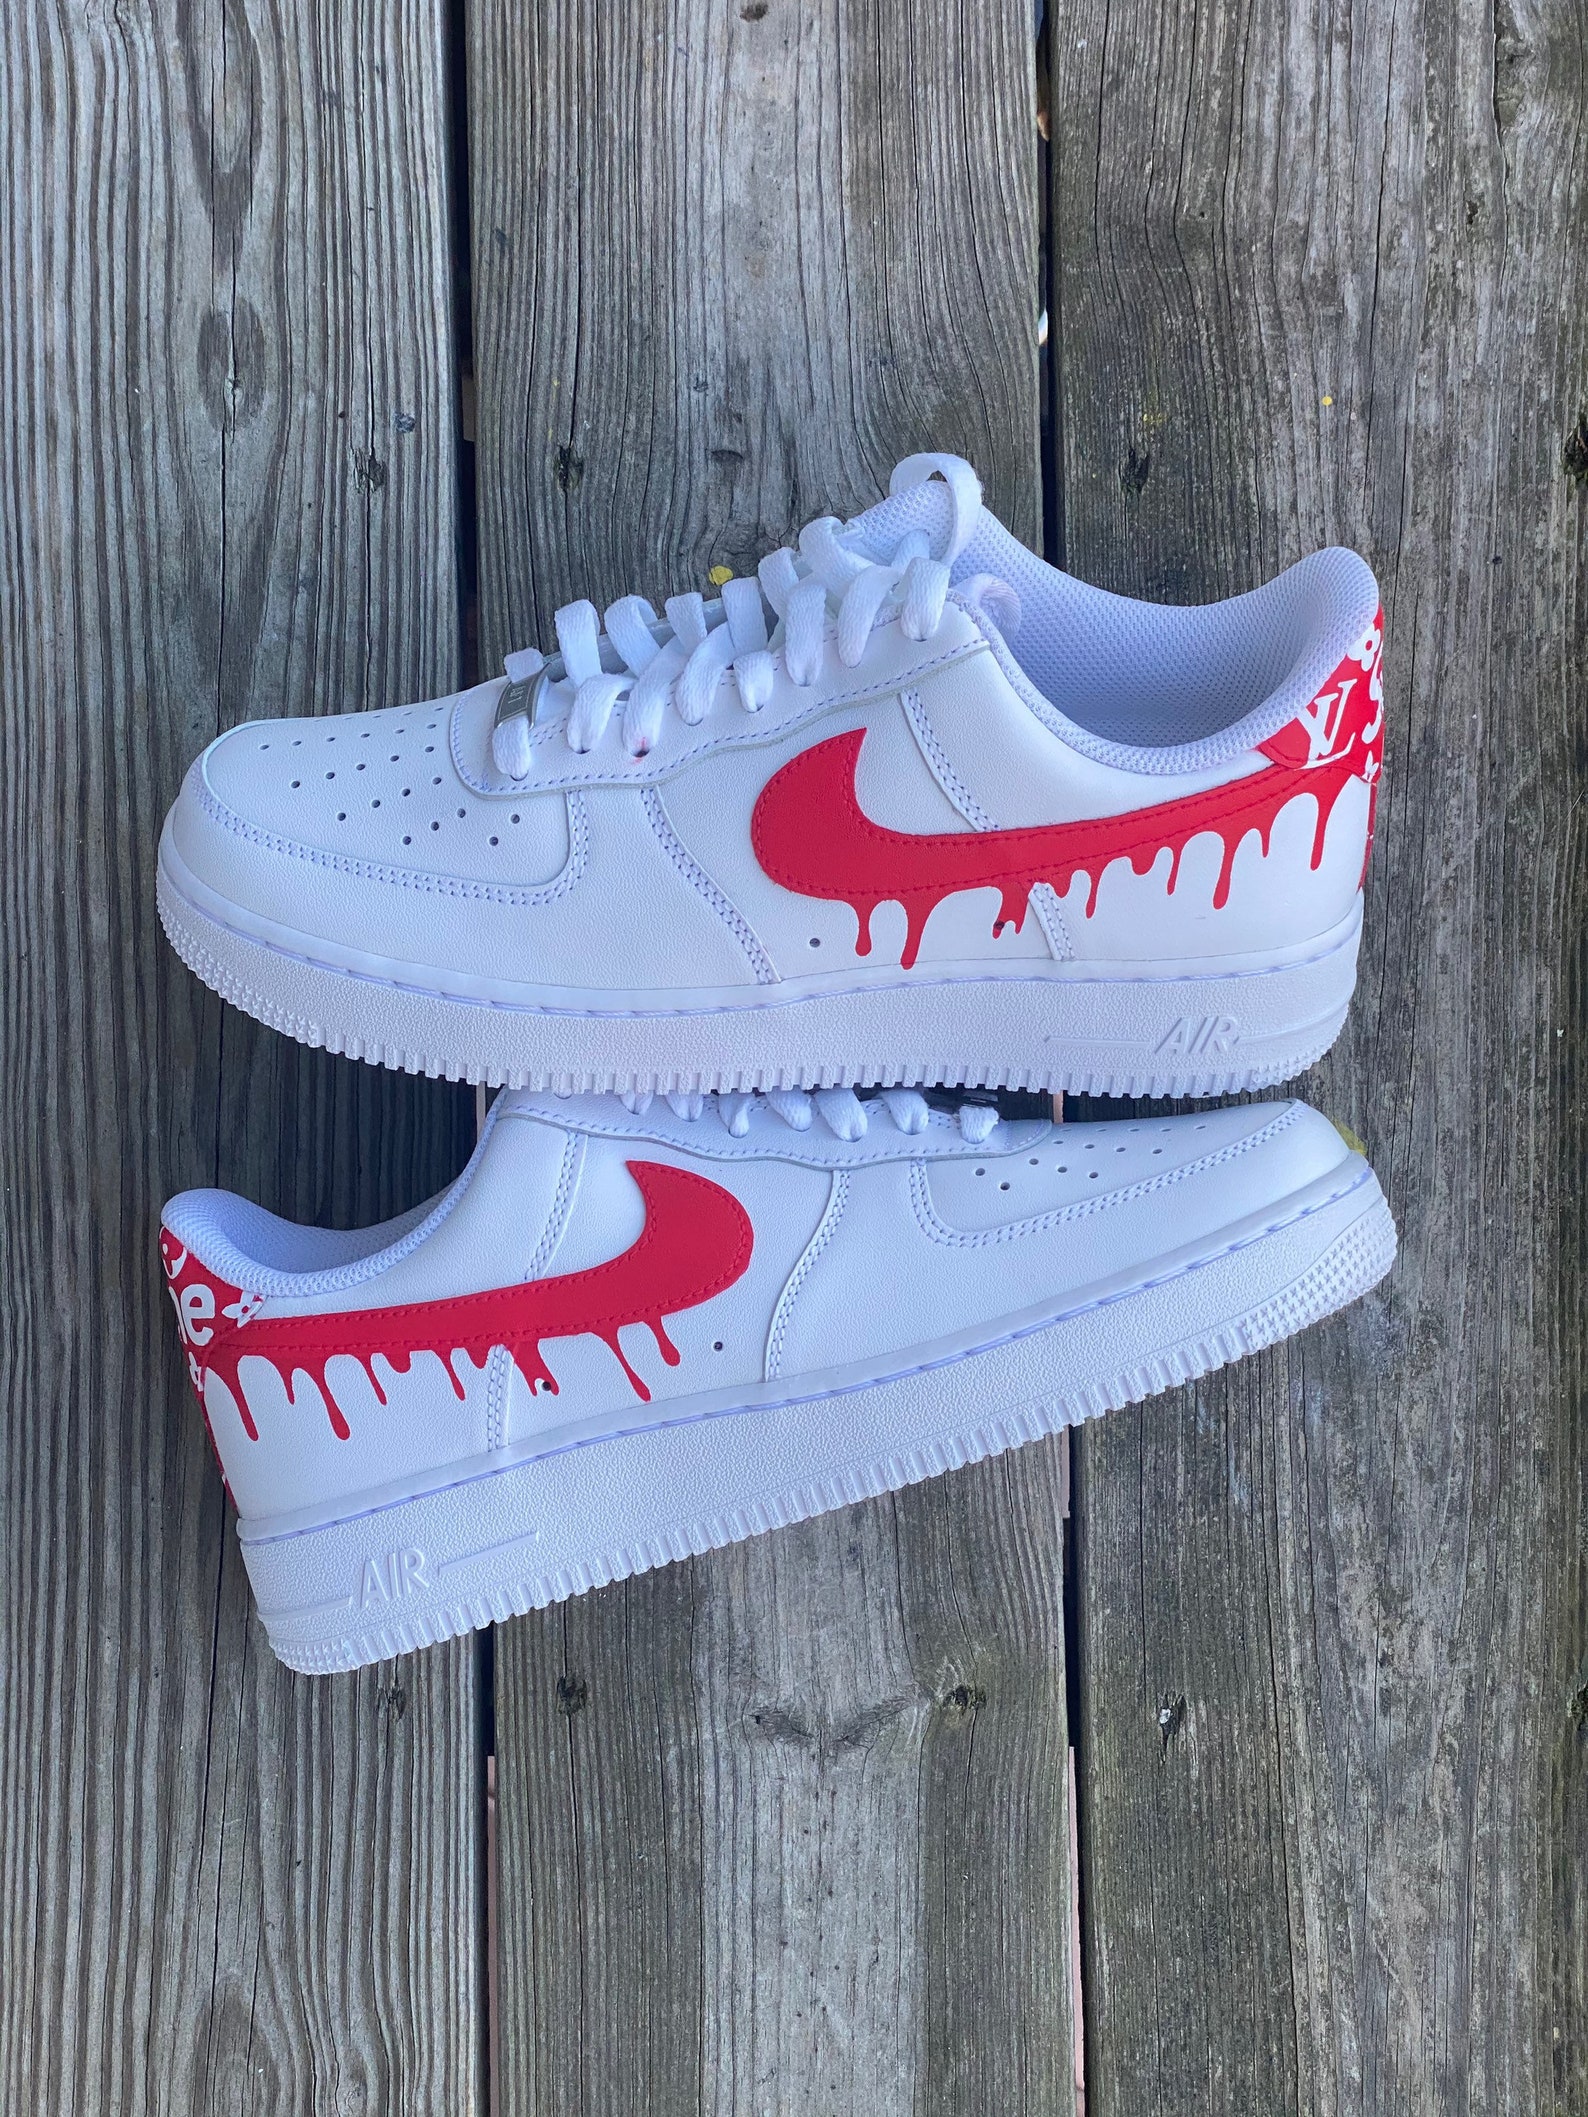 Nike Air Force 1 Louis Vuitton Red all sizes | Etsy